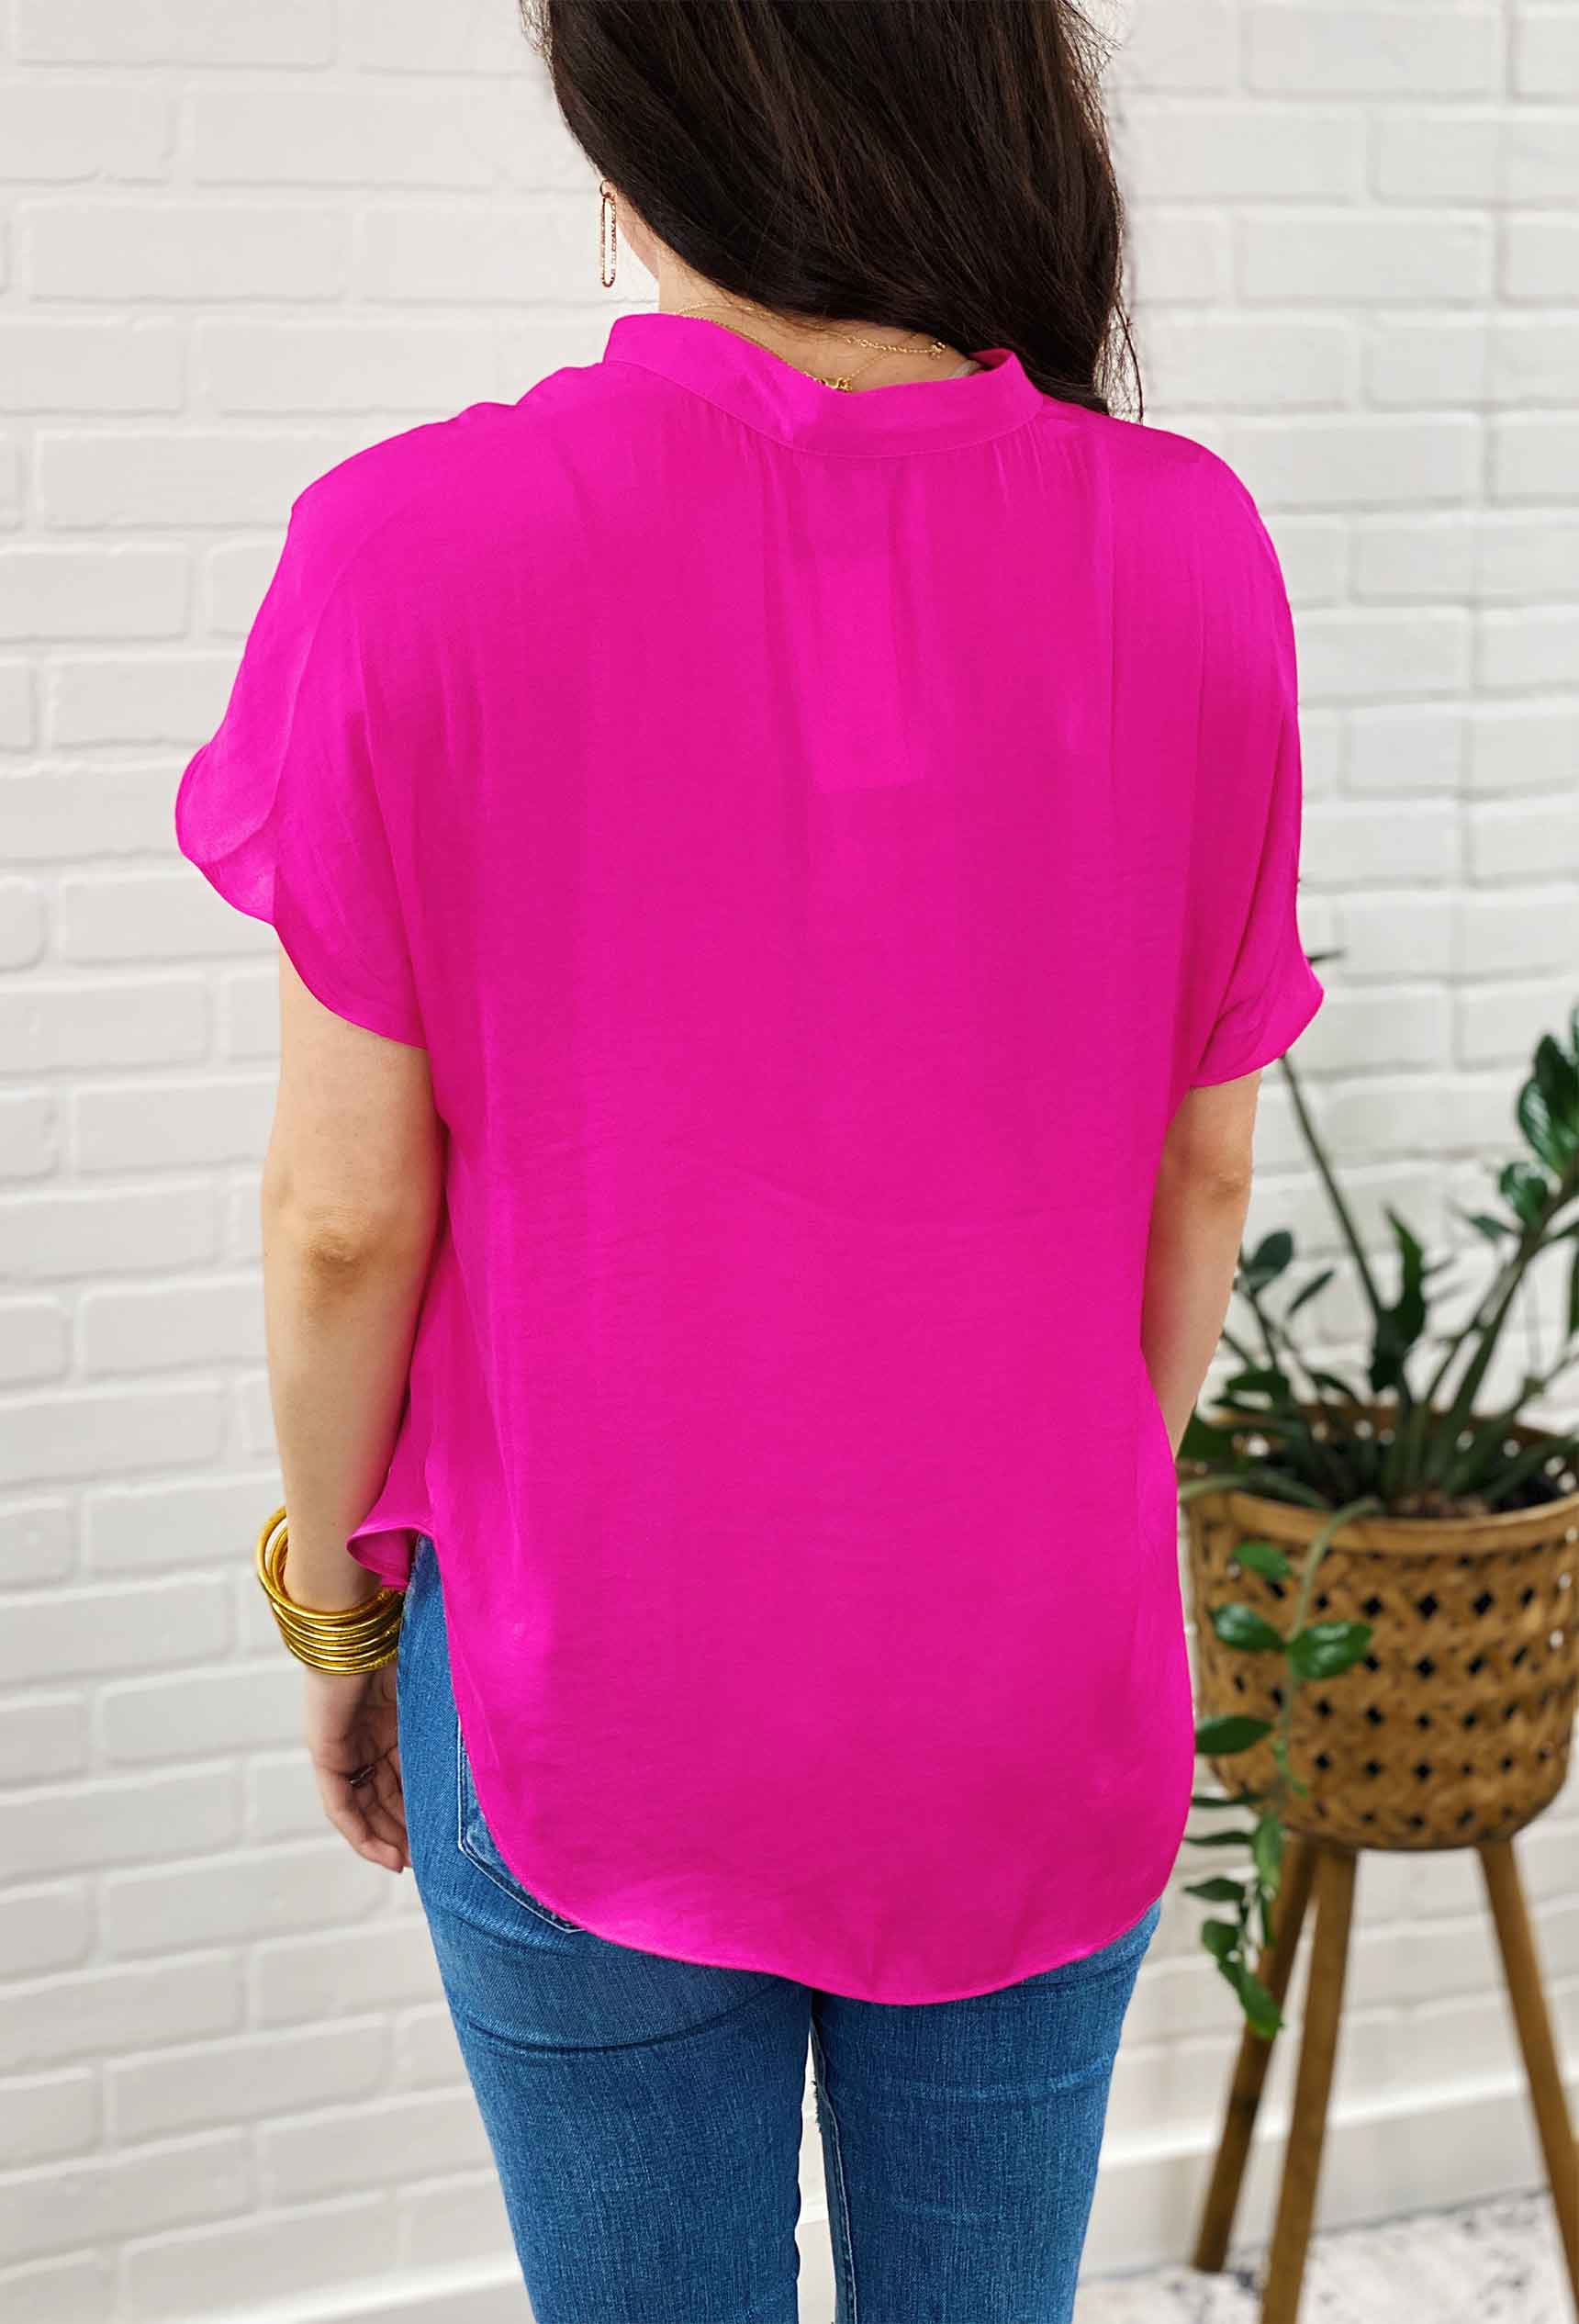 Kerry Blouse in Hot Pink, hot pink v neck silk blouse 